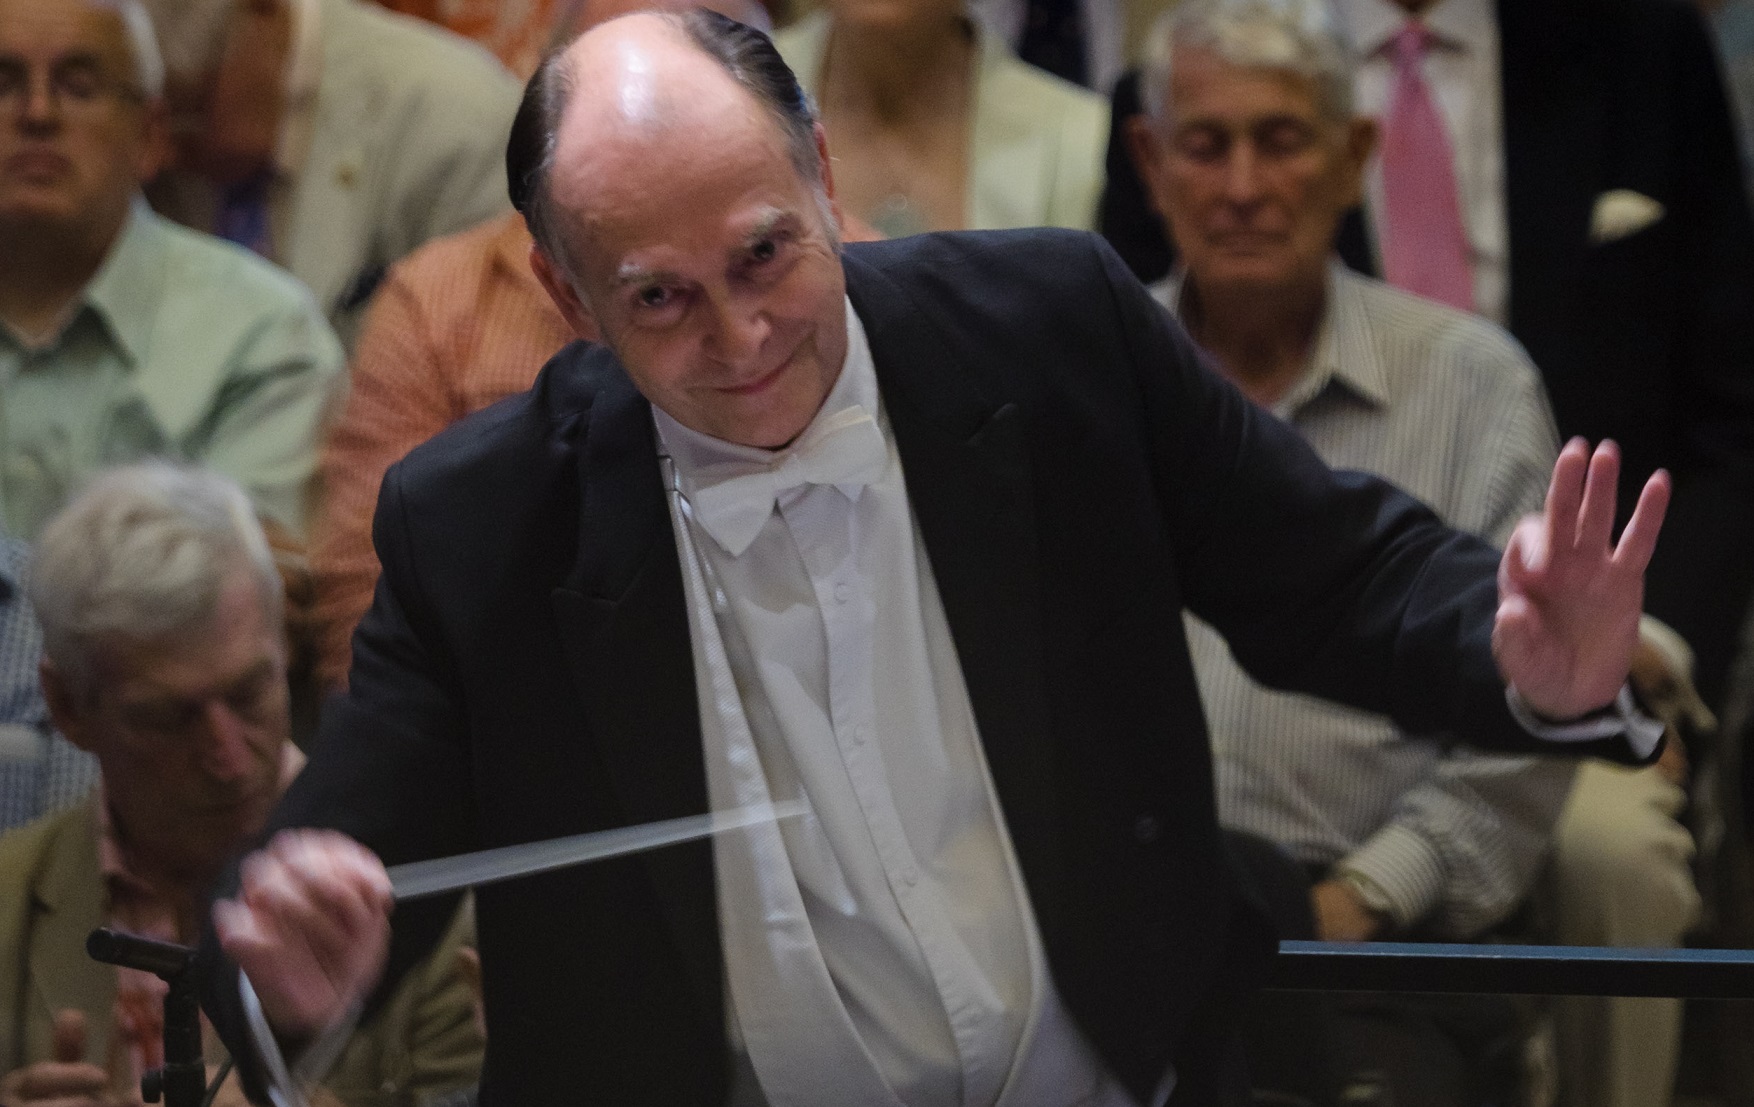 The Royal Philharmonic Orchestra will be conducted by Adrian Partington.